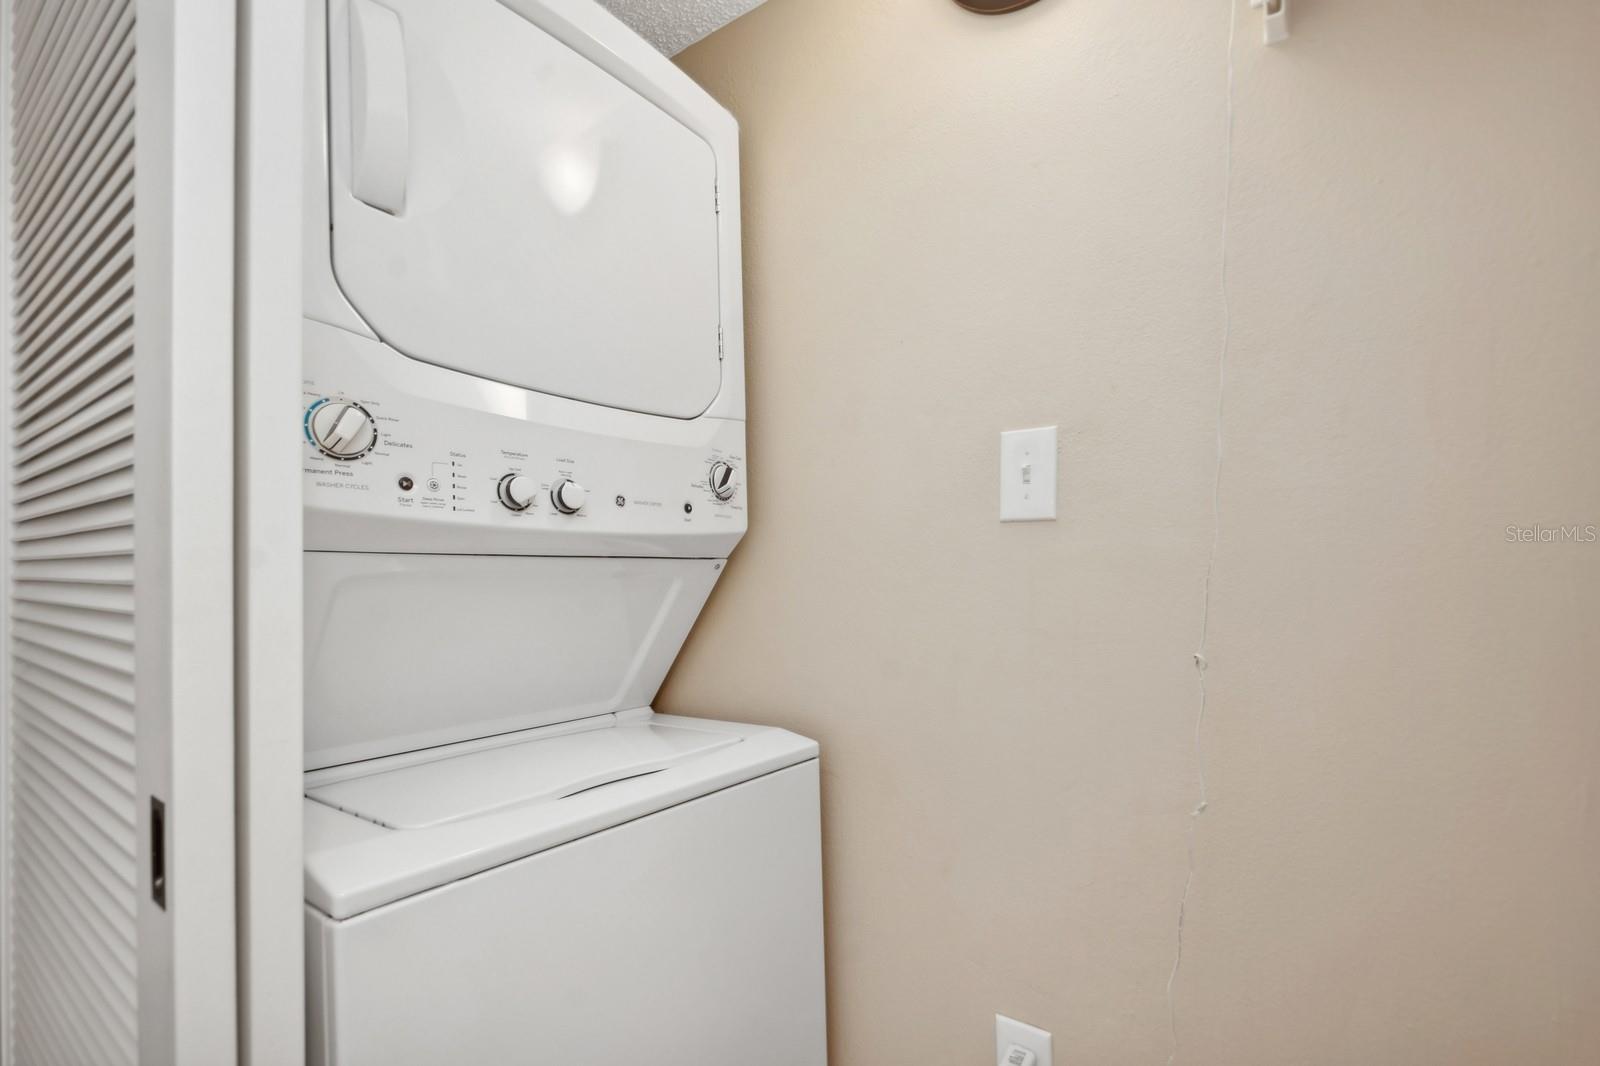 Laundry Room is located in the hallway between the Guest Bedroom and Bathroom.